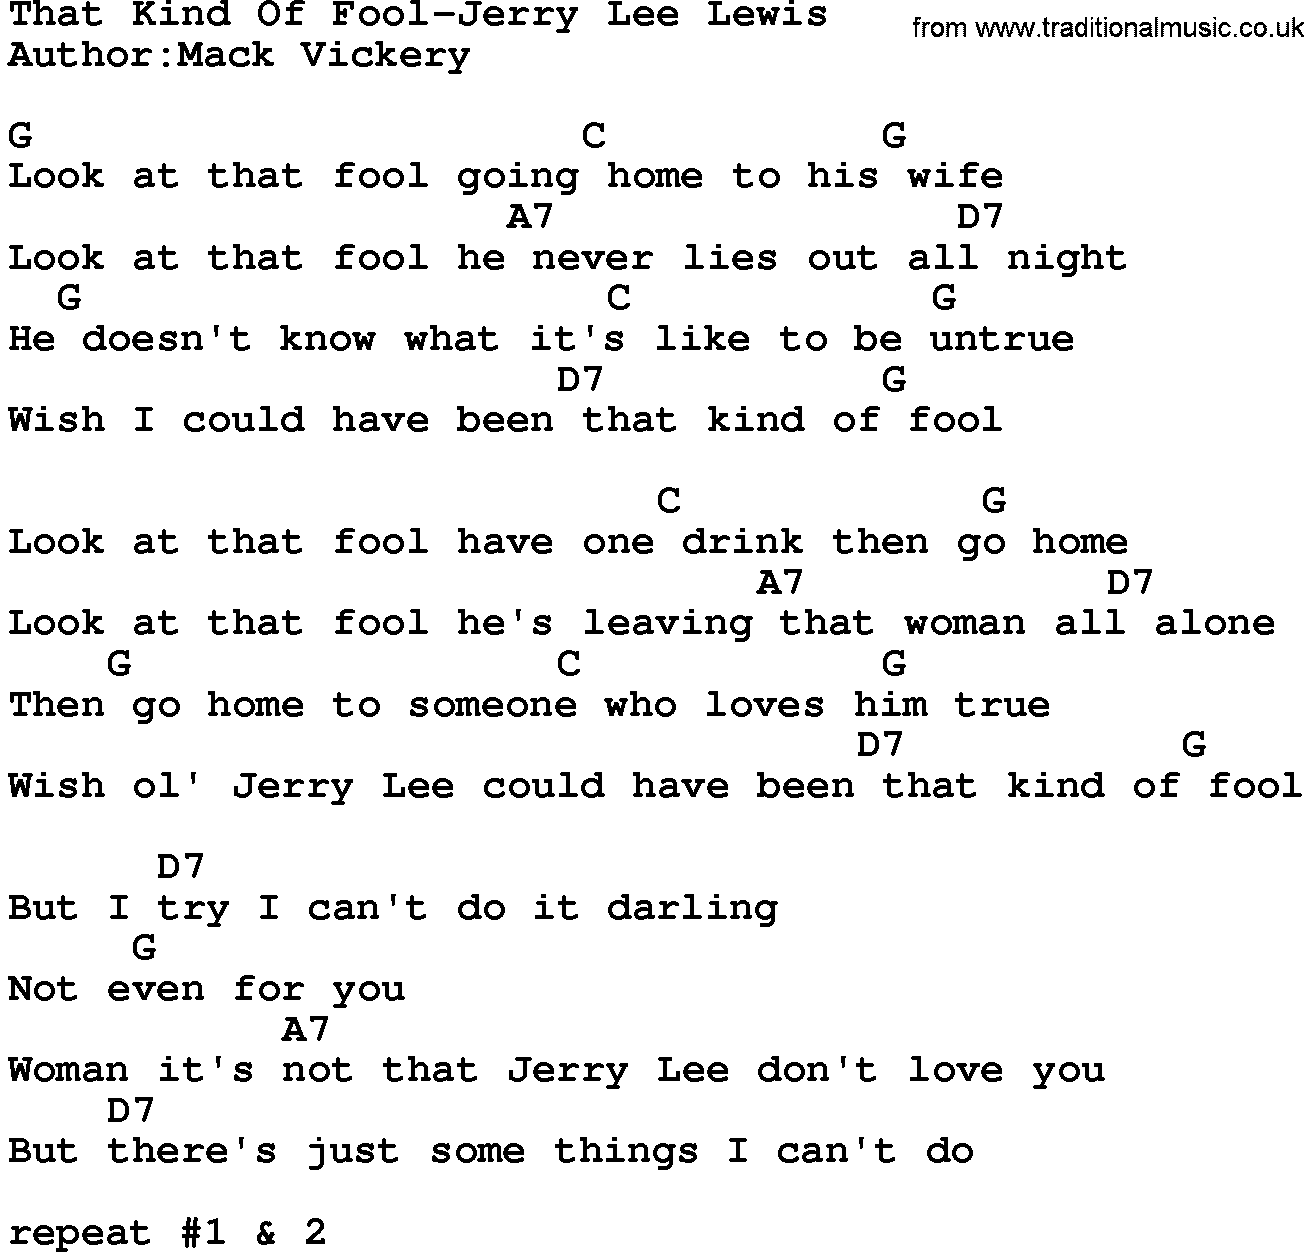 Country music song: That Kind Of Fool-Jerry Lee Lewis lyrics and chords